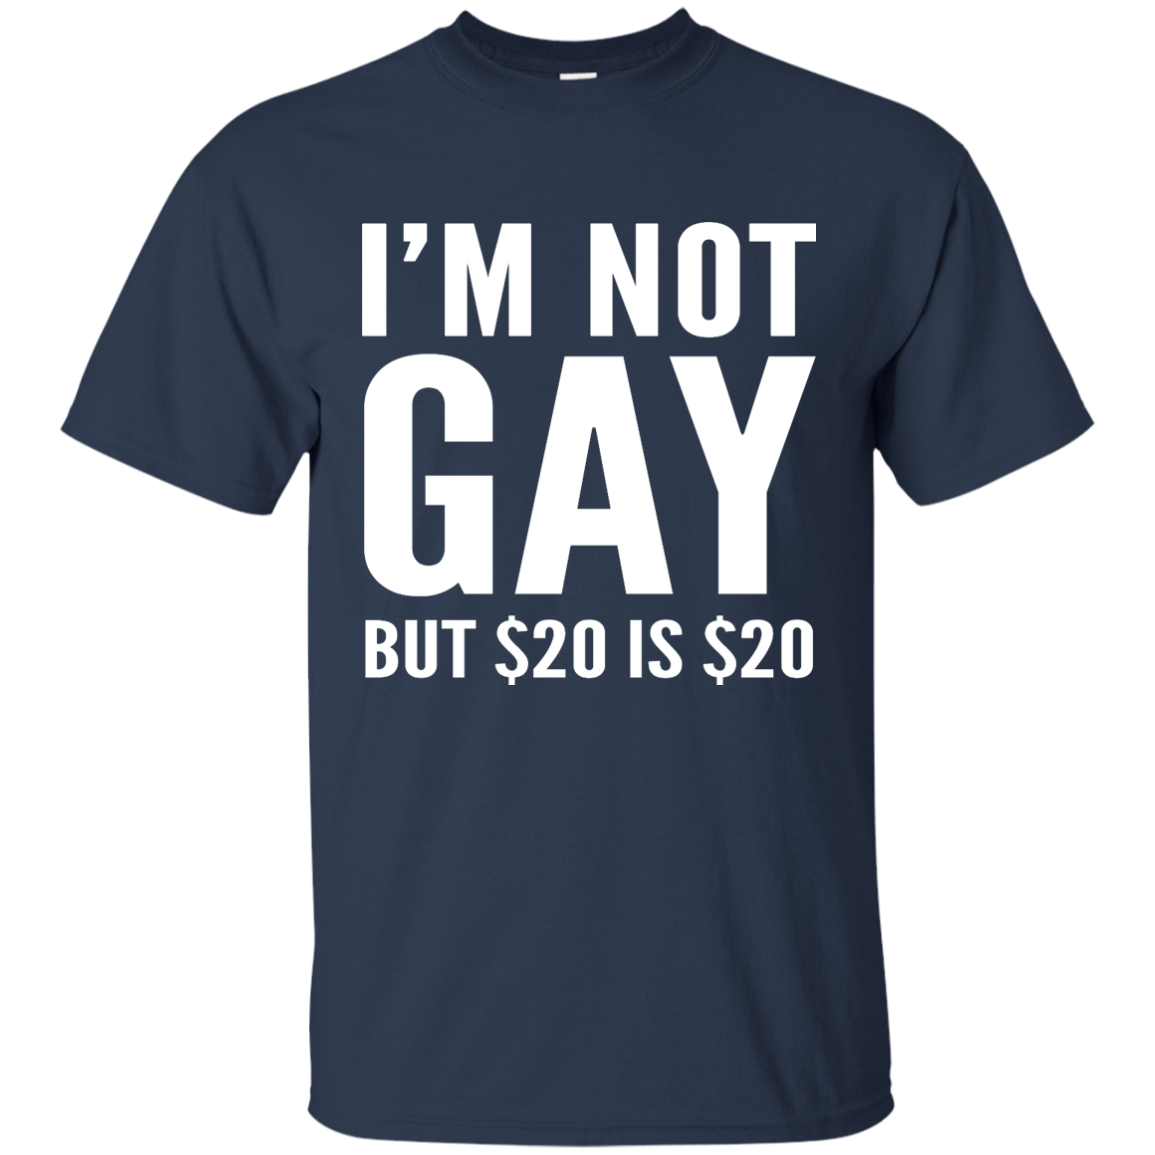 I'm not Gay but $20 is $20 Shirt, Hoodie, Tank